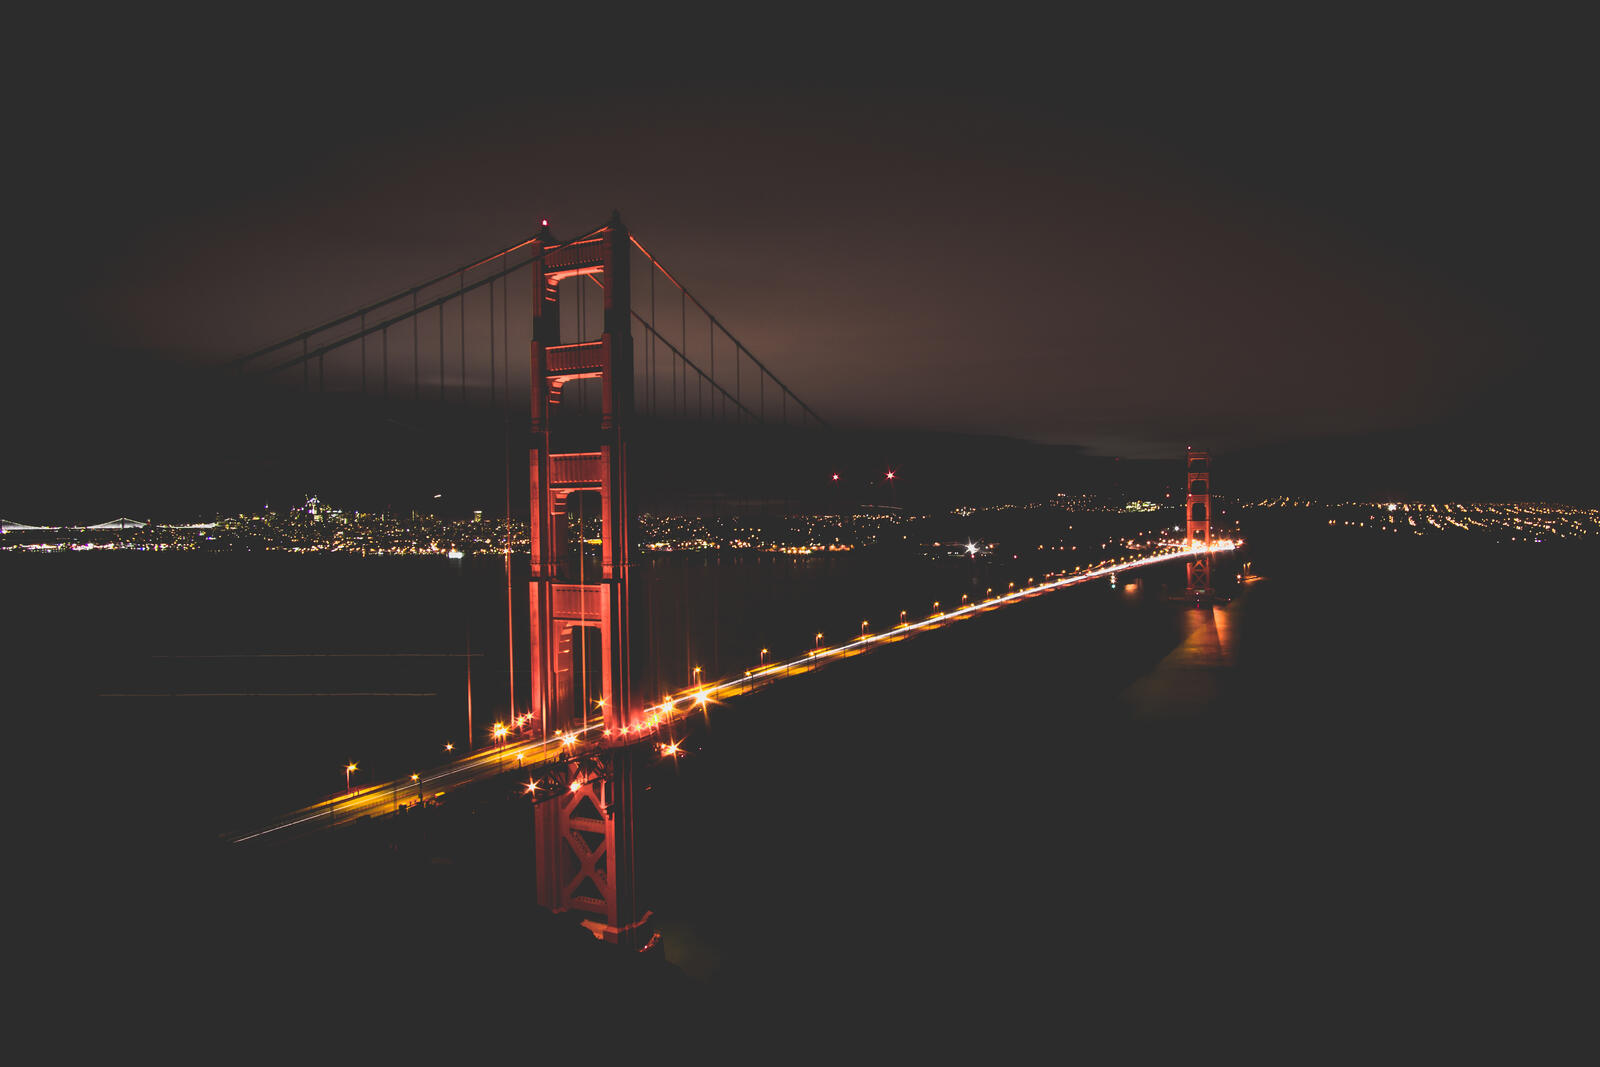 Wallpapers night bridge with golden gates cityscape on the desktop